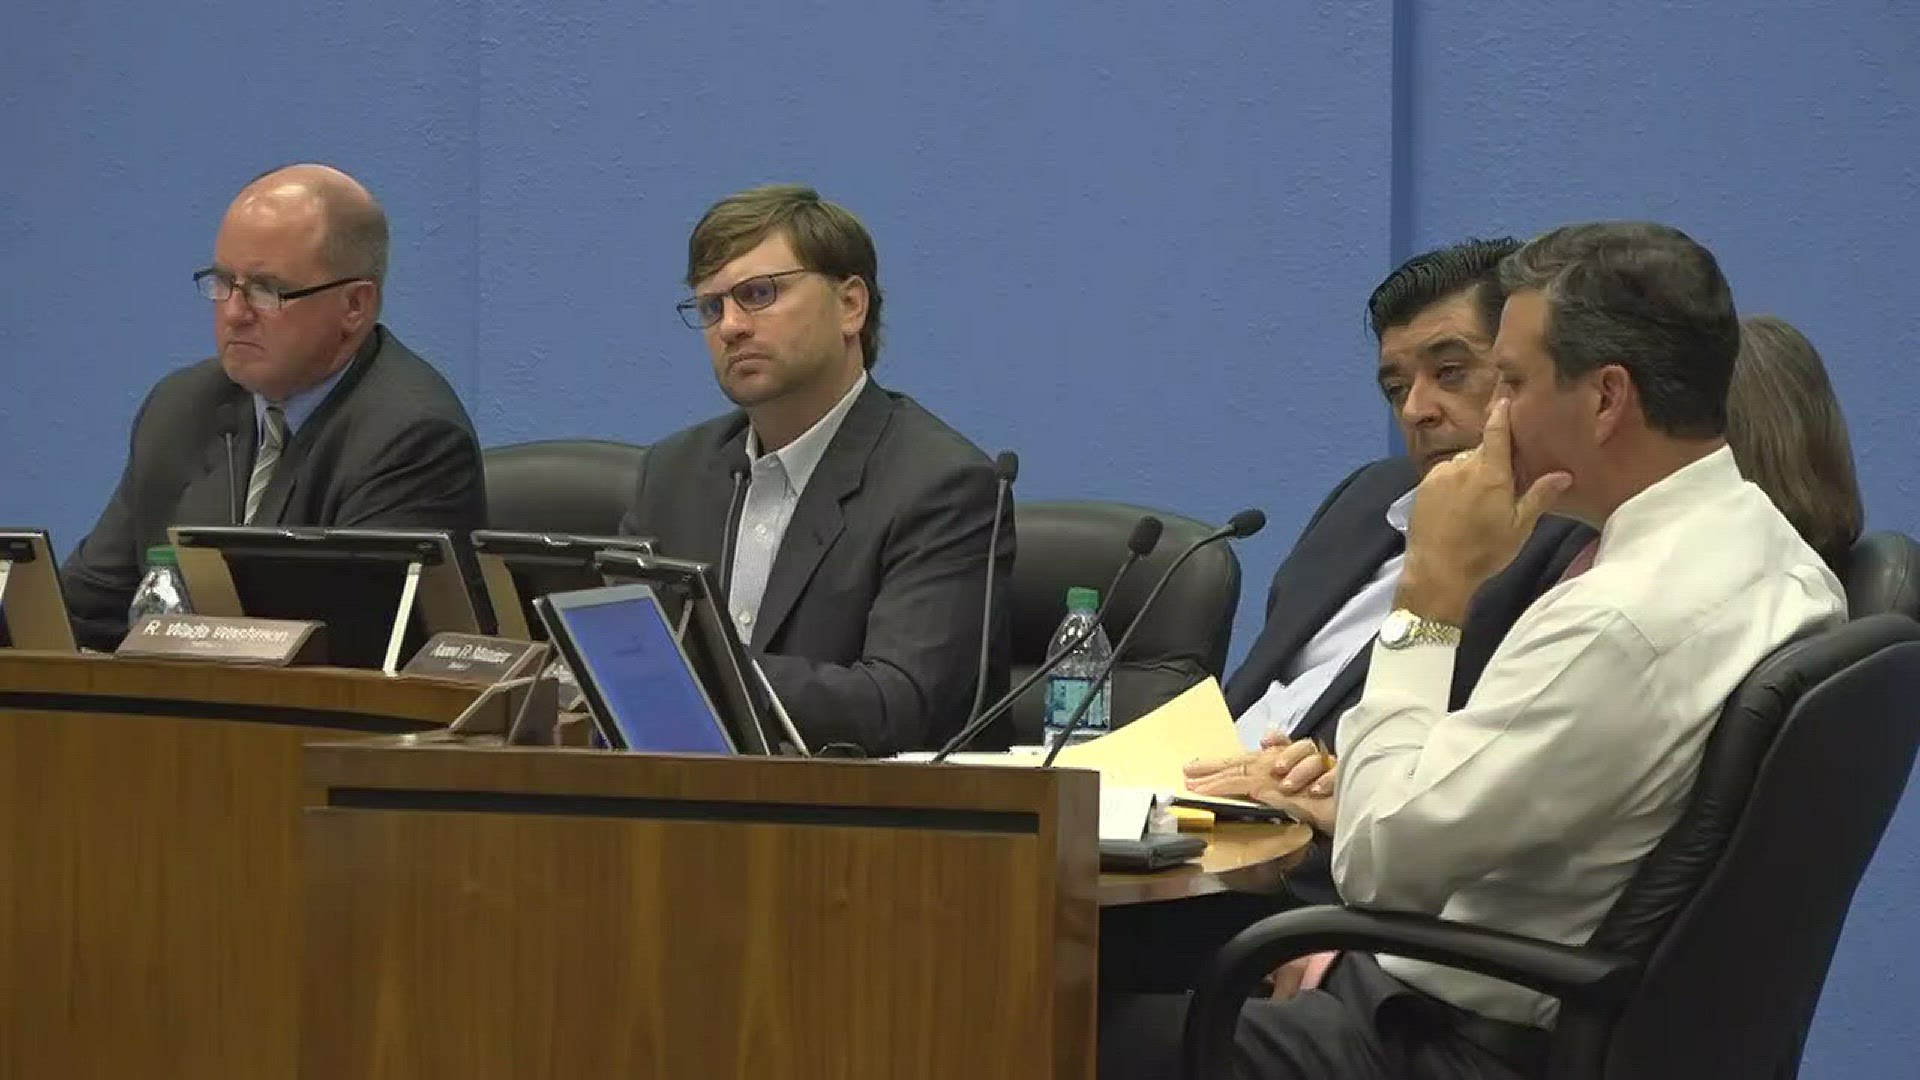 TISD school board members discuss their thoughts on the idea of renaming schools. Tristan Hardy reports.